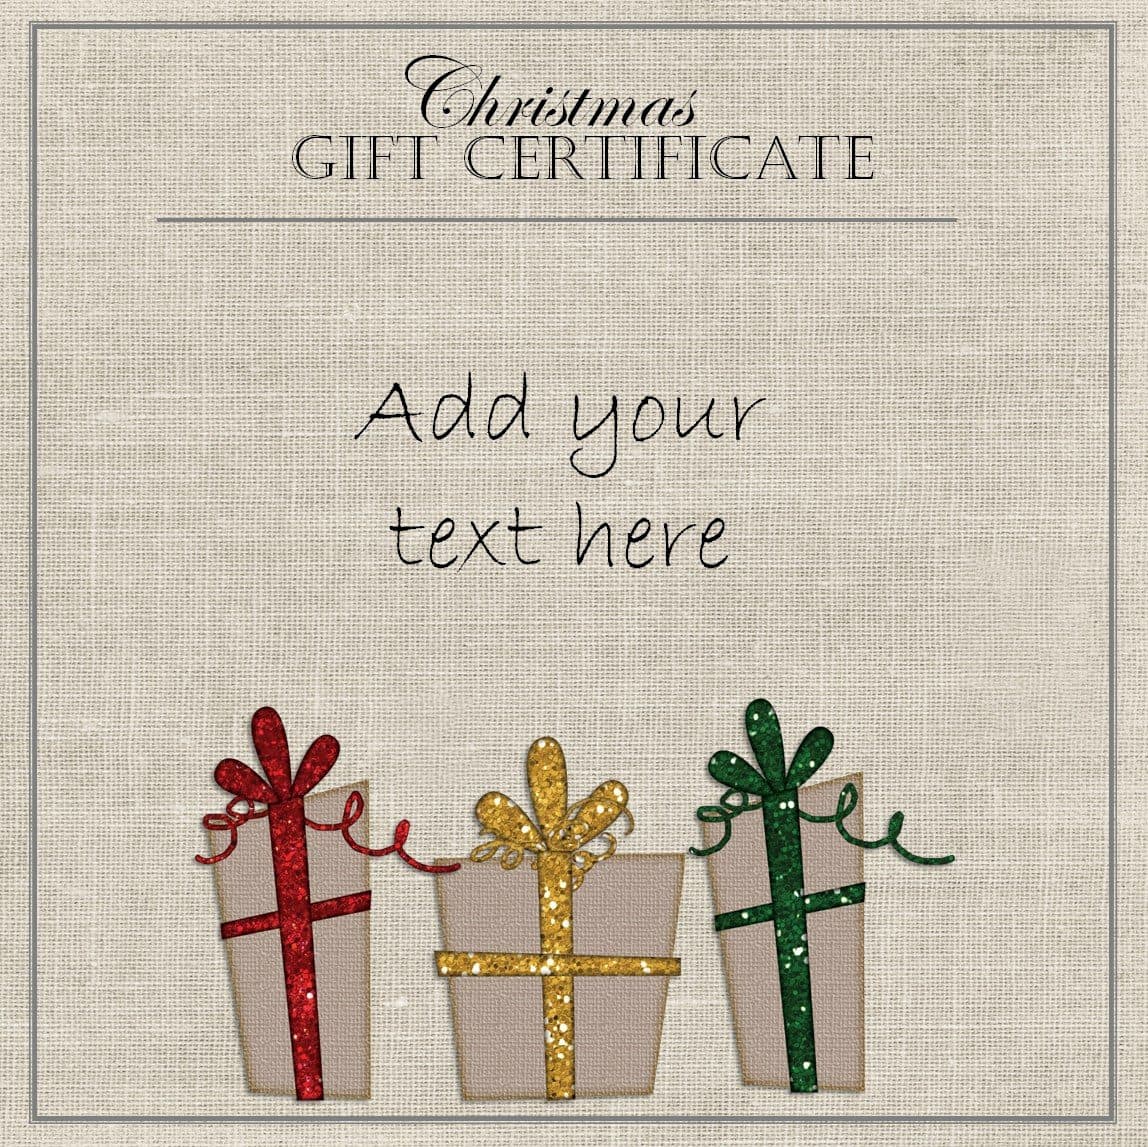 Free Holiday Gift Certificates Templates to Print  Free gift certificate  template, Christmas gift certificate template, Christmas gift certificate